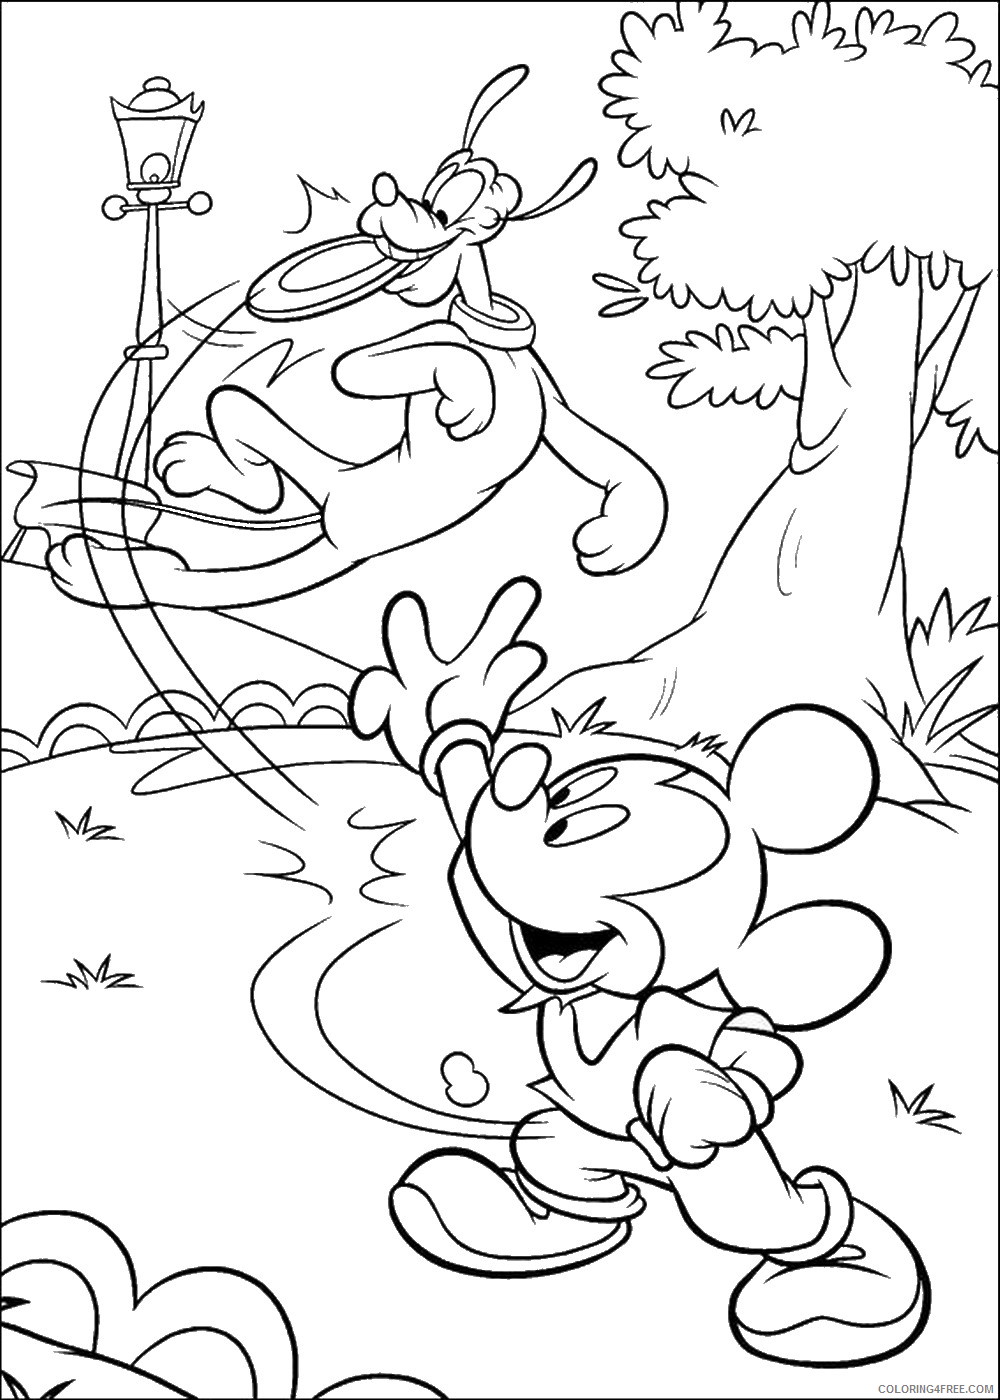 Pluto Coloring Pages Cartoons pluto_cl_39 Printable 2020 4949 Coloring4free